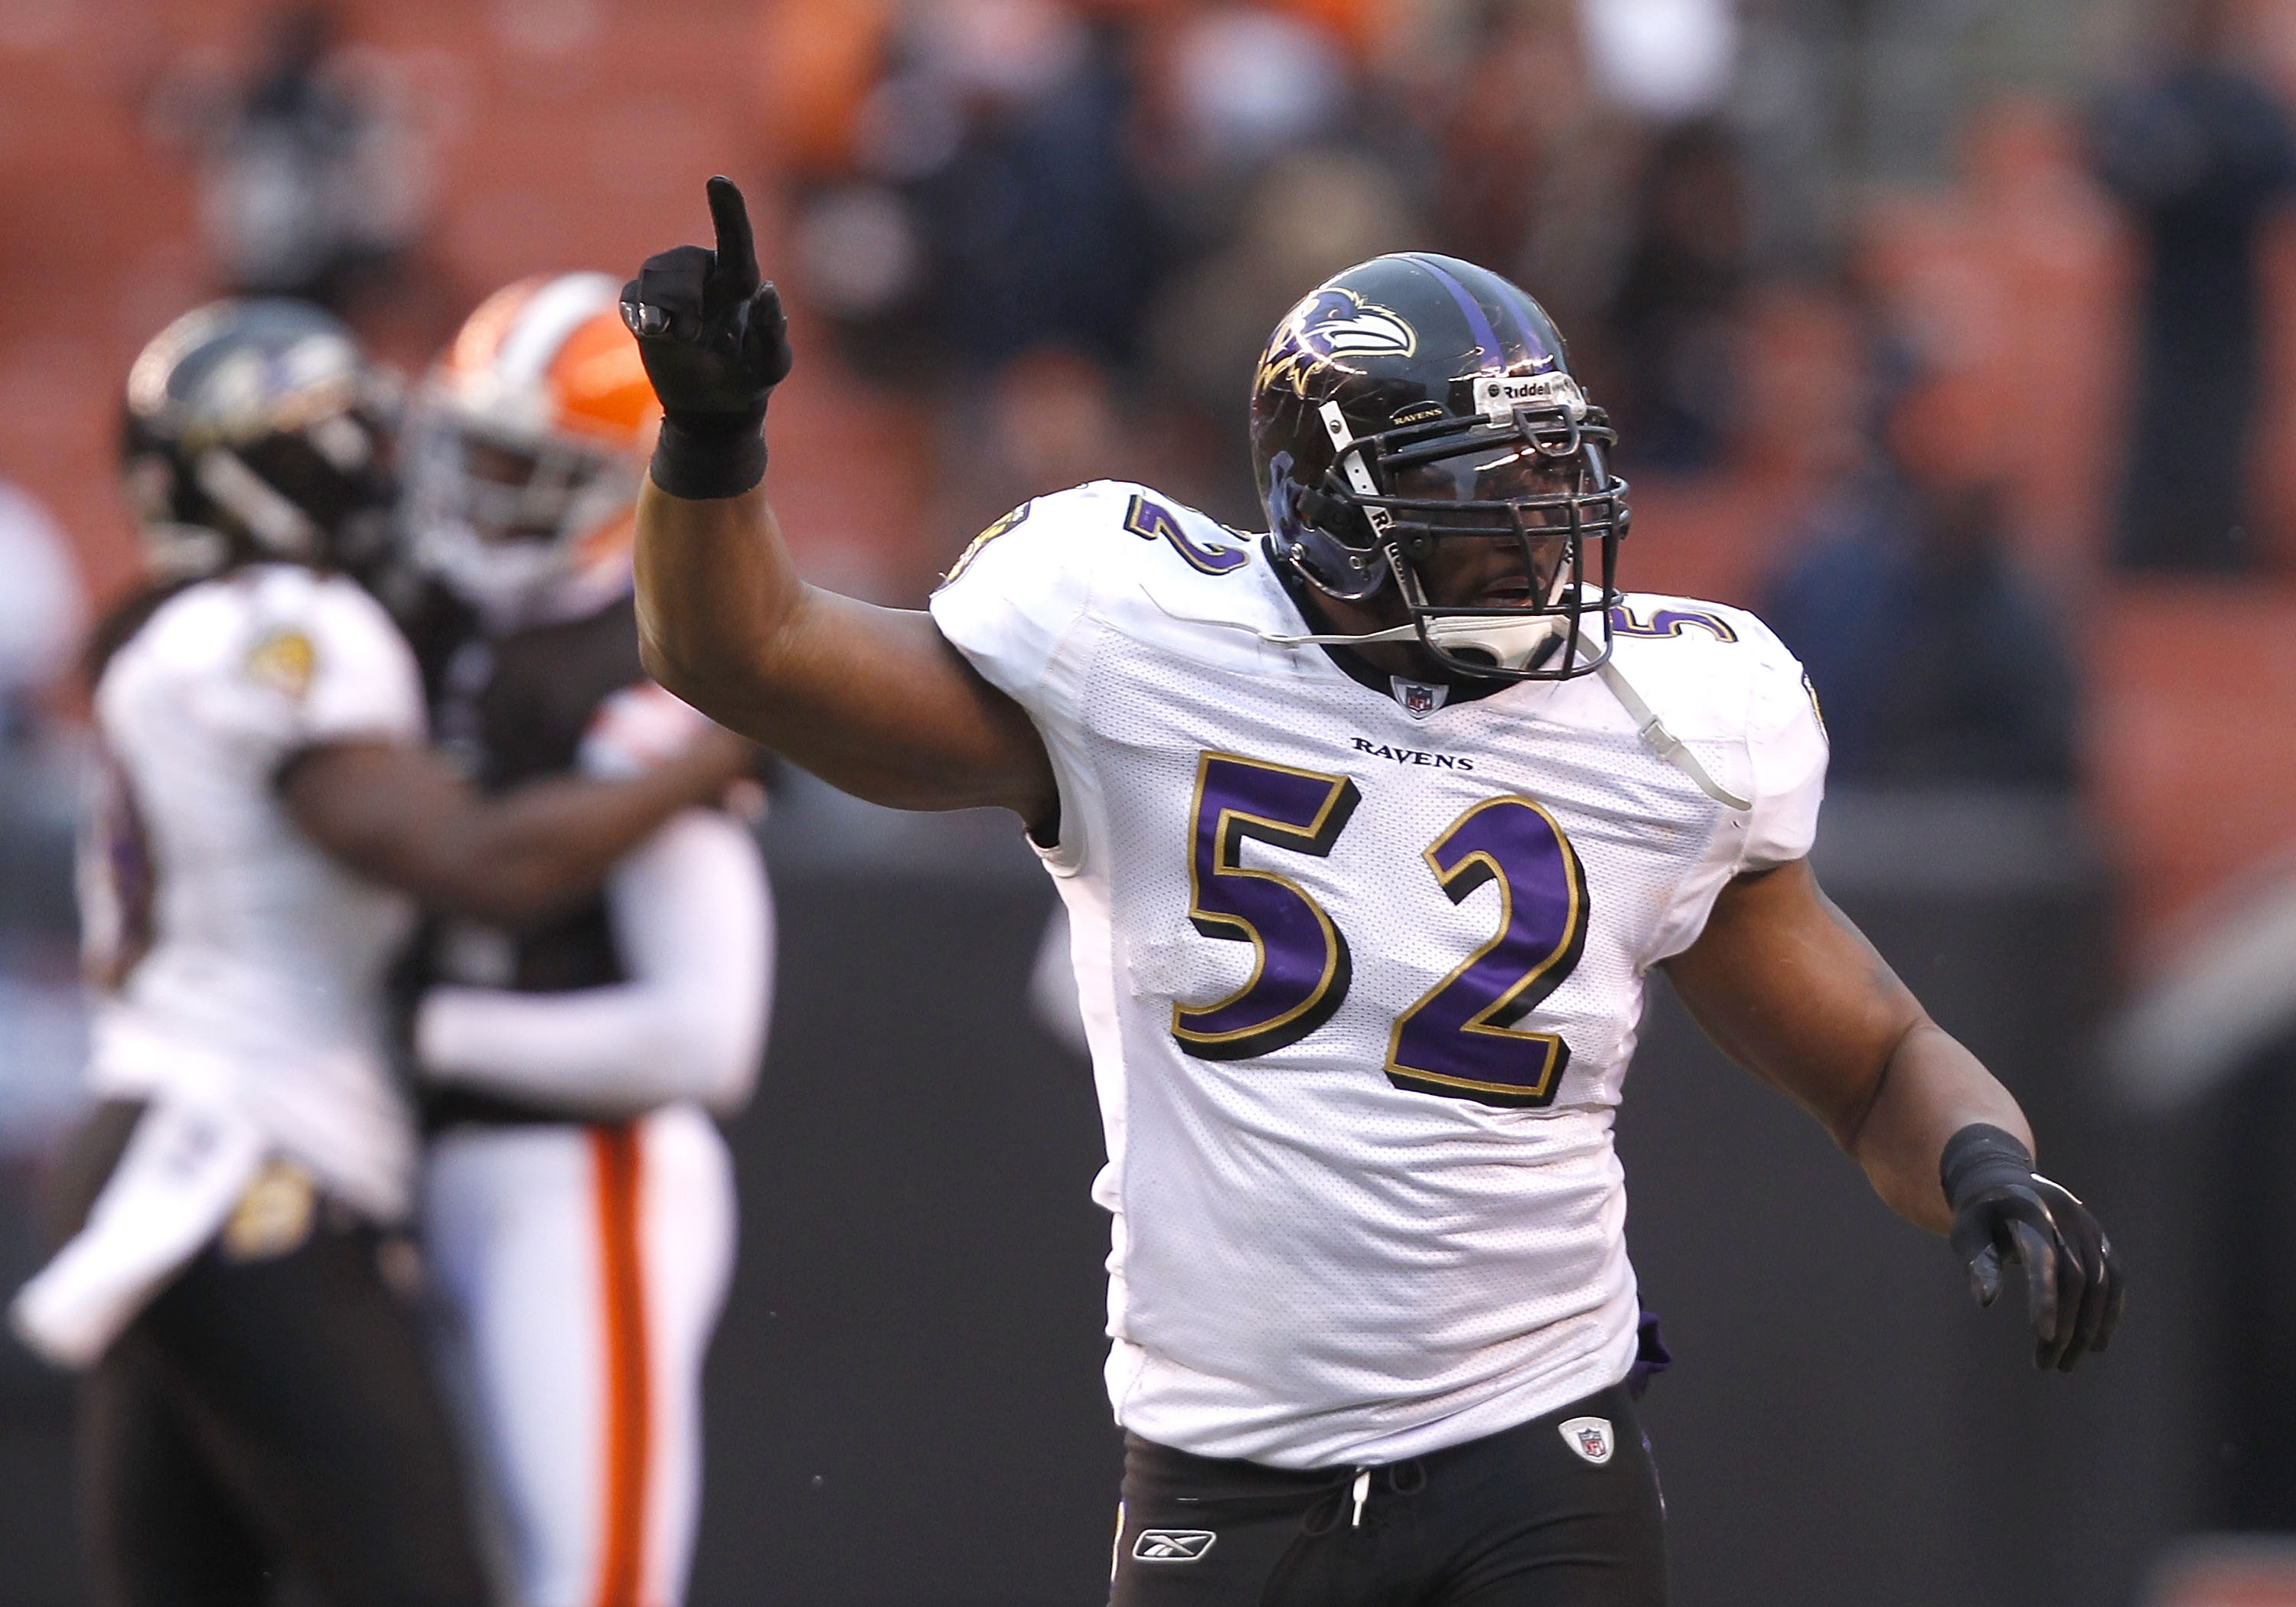 CLEVELAND - DECEMBER 26:  Linebacker Ray Lewis #52 of the Baltimore Ravens celebrates as he leaves the field after their game against the Cleveland Browns at Cleveland Browns Stadium on December 26, 2010 in Cleveland, Ohio.  (Photo by Matt Sullivan/Getty 